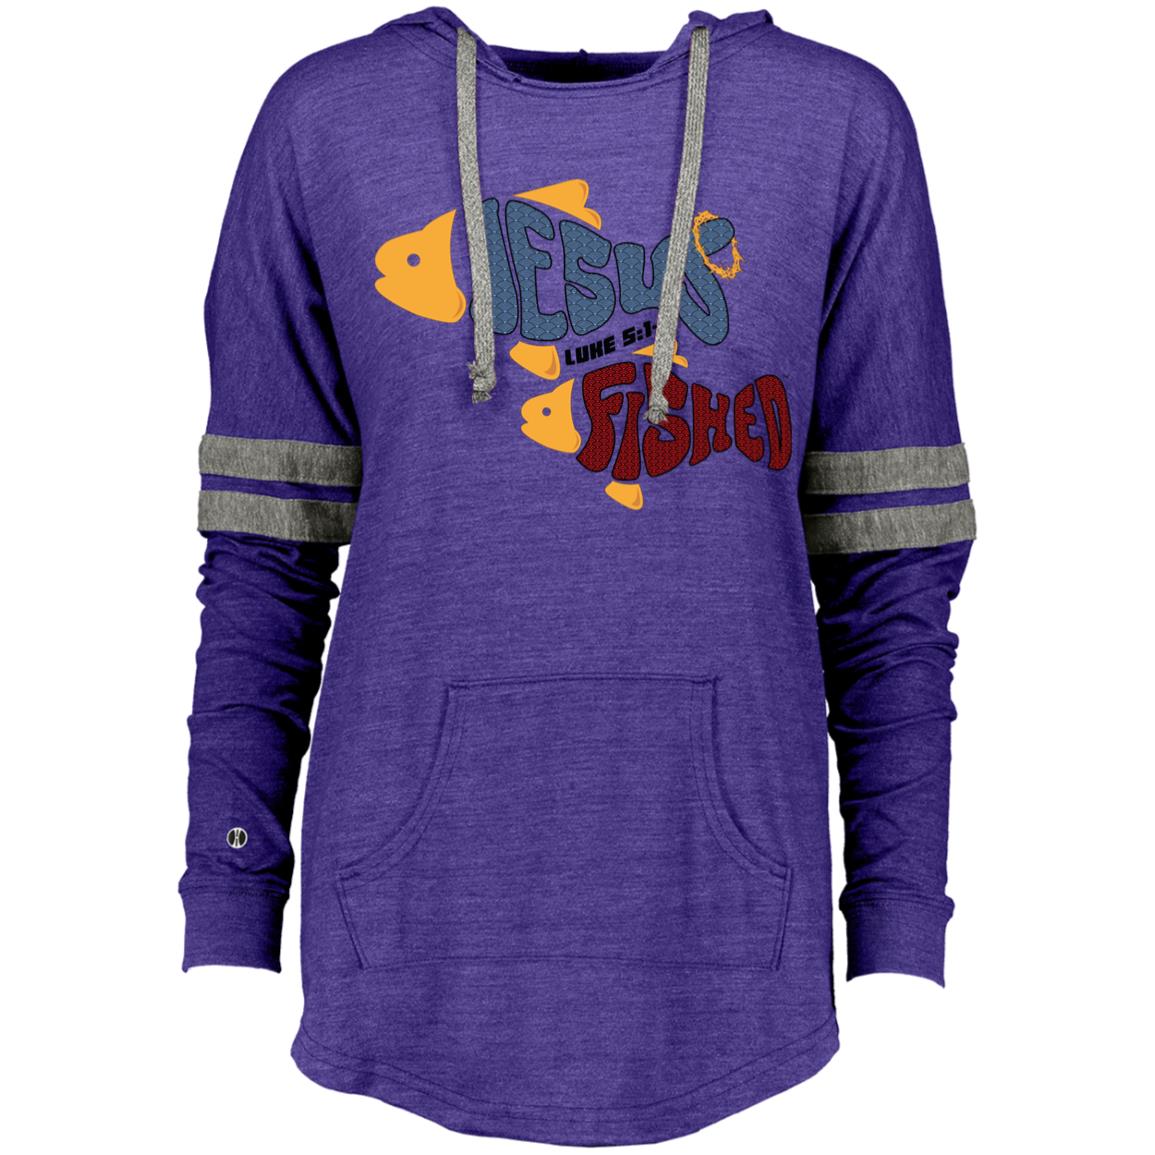 OneFish TwoFish Women Low Key Hoodie T Pullover